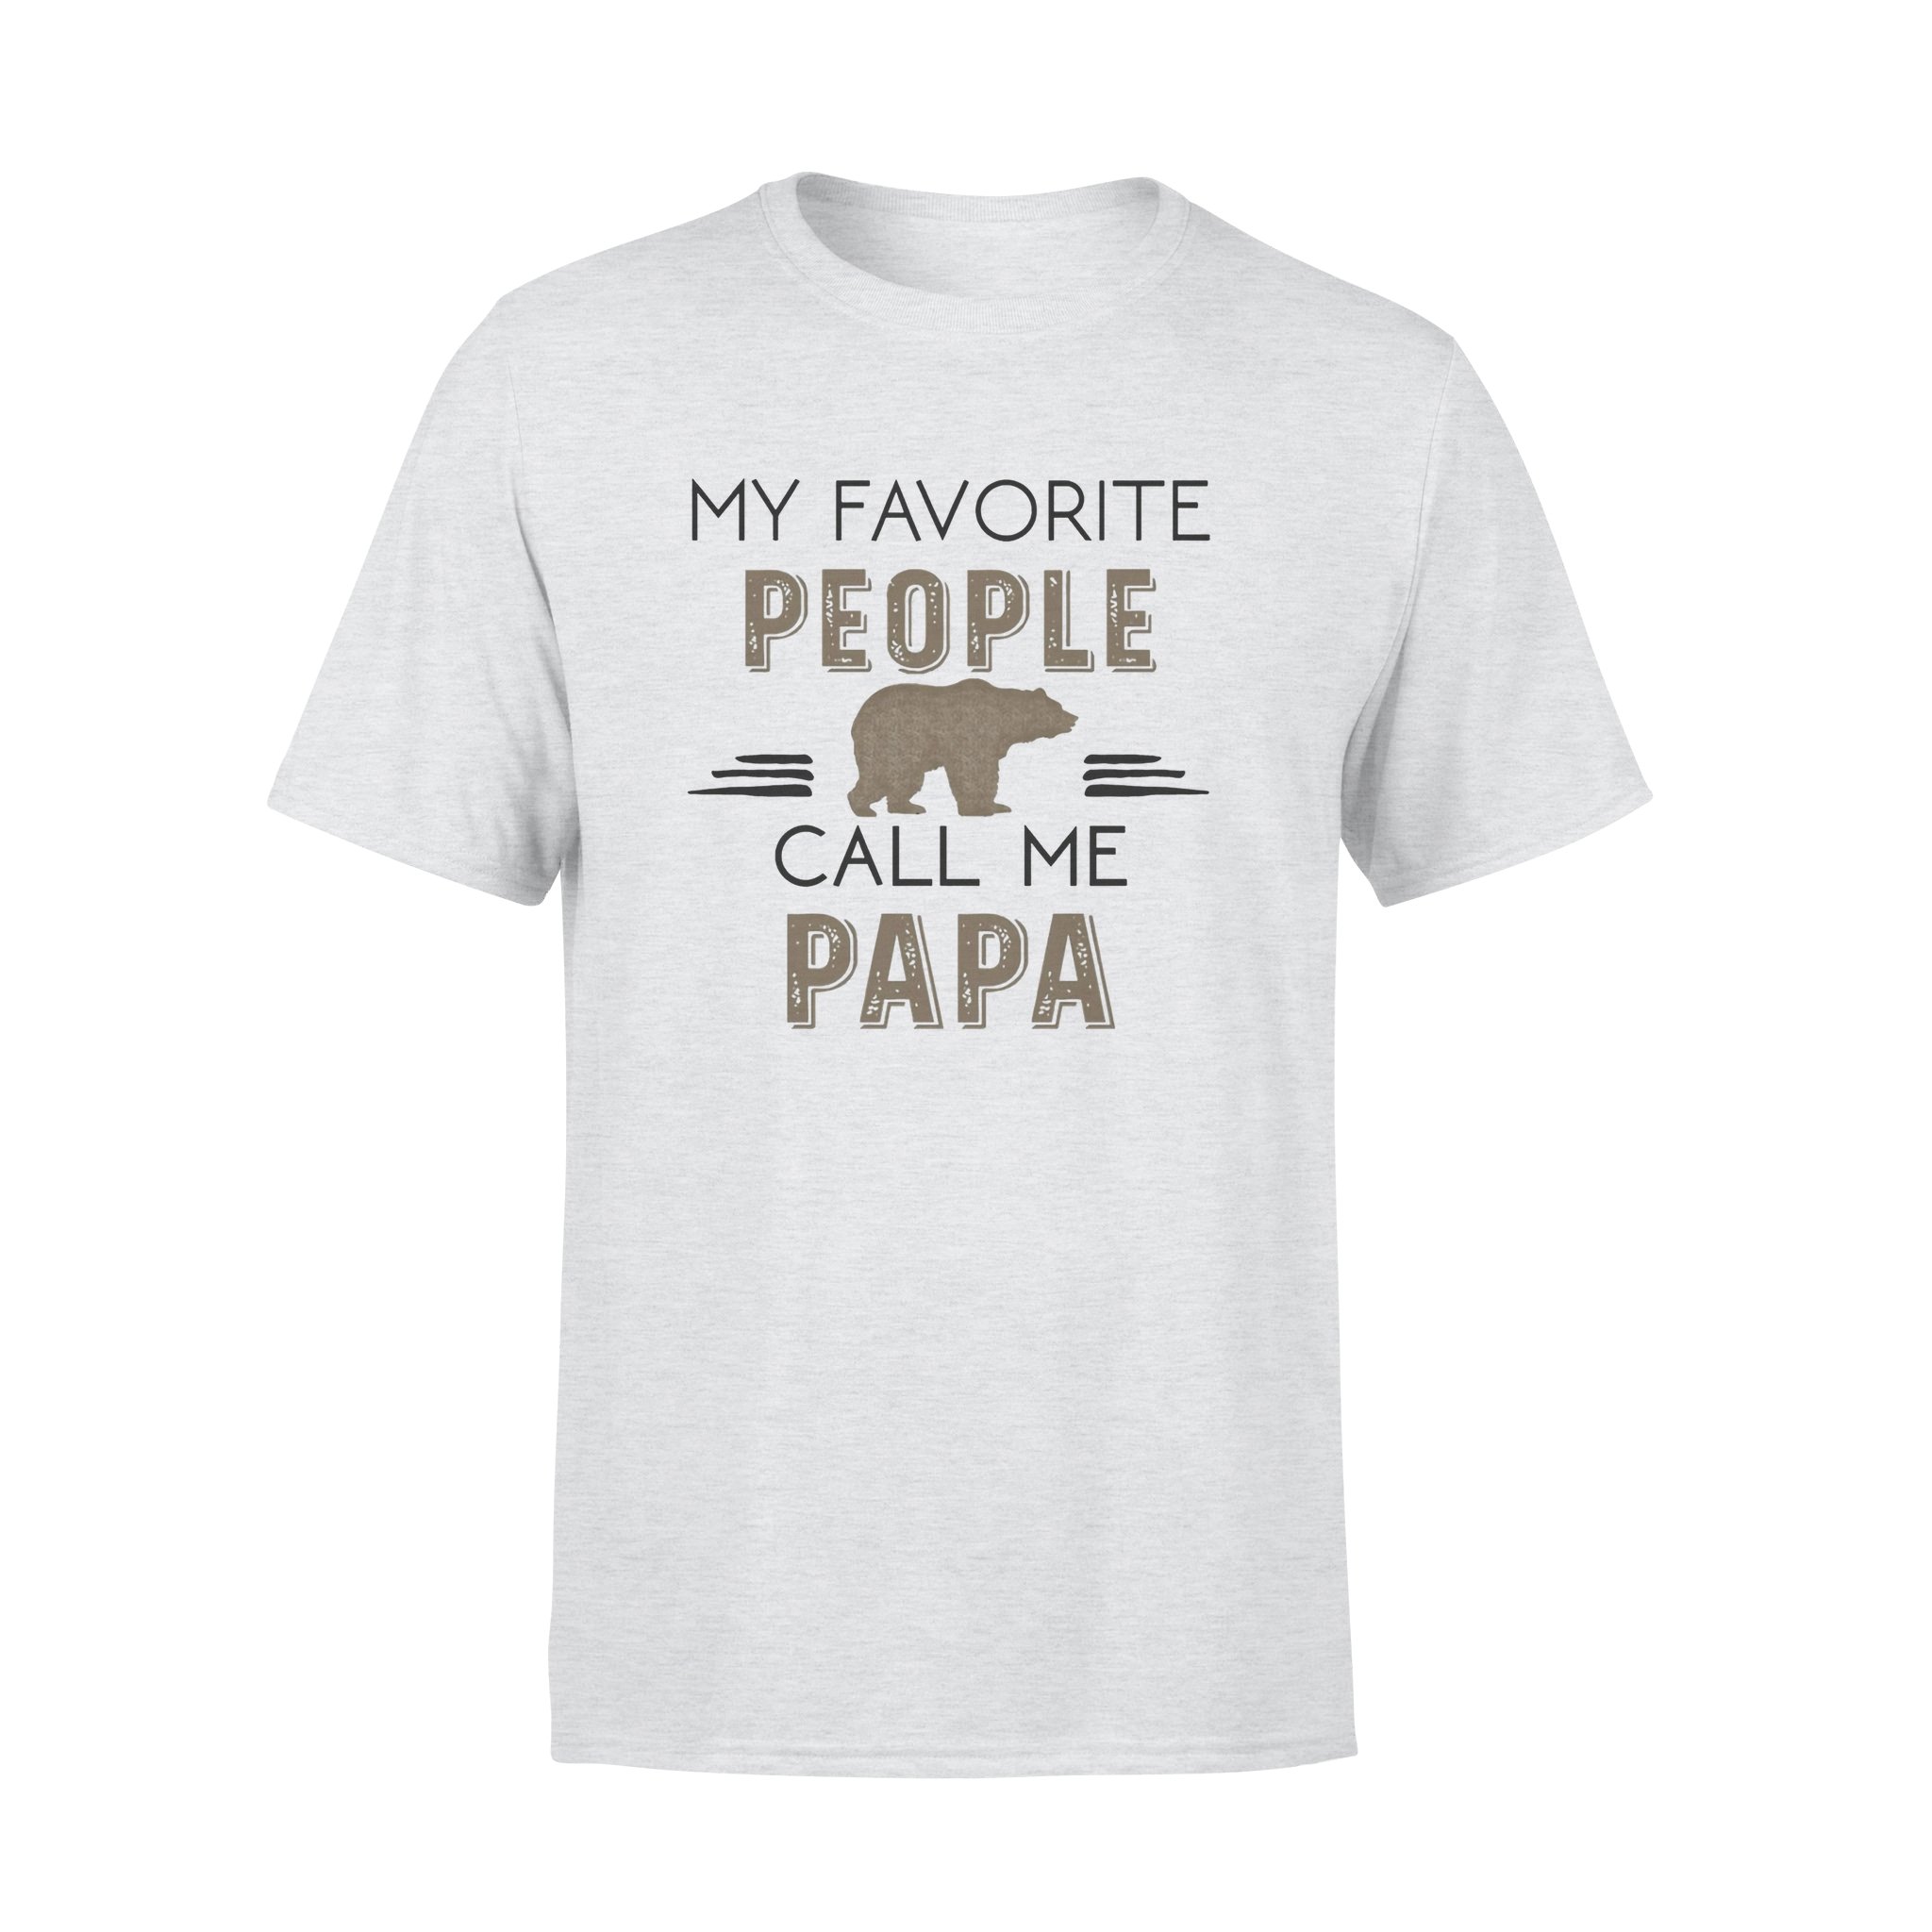 MY FAVORITE PEOPLE CALL ME PAPA, GIFTS FOR GRANDPA,GRANDPA SHIRT,GRANDPA GIFTS,FATHER?S DAY GIFT,PLUS SIZE SHIRT 1